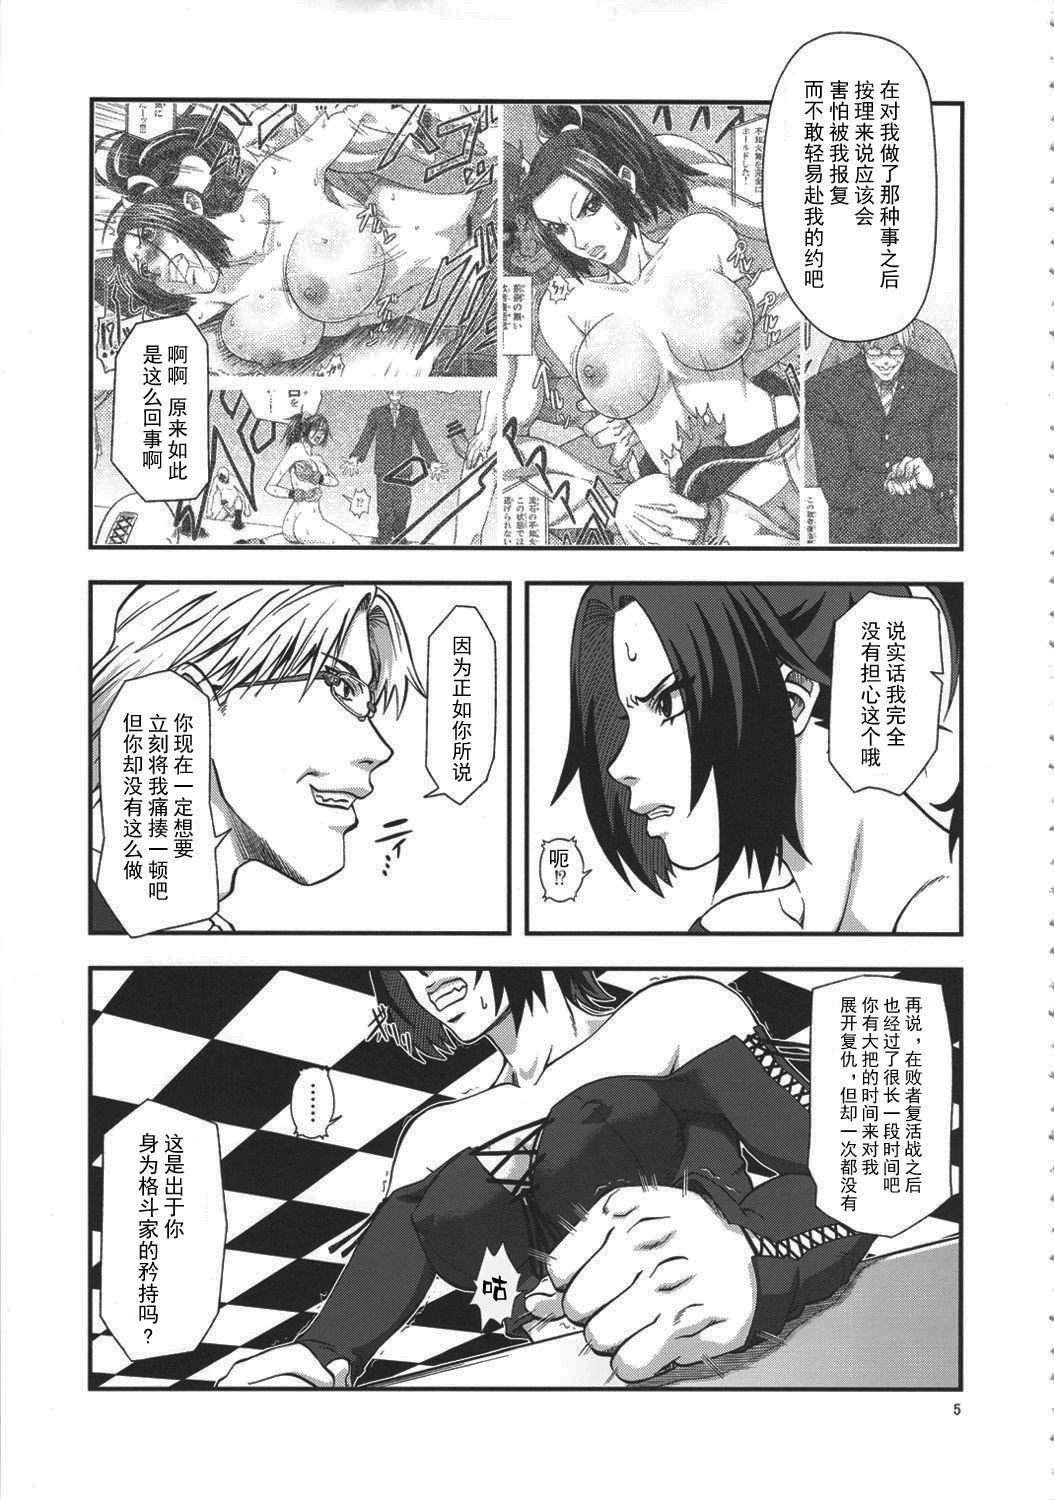 Assfucked [Tokkuriya (Tonbo)] Shiranui Muzan 3 (King of Fighters) [Chinese]【不可视汉化】 - King of fighters Trap - Page 5